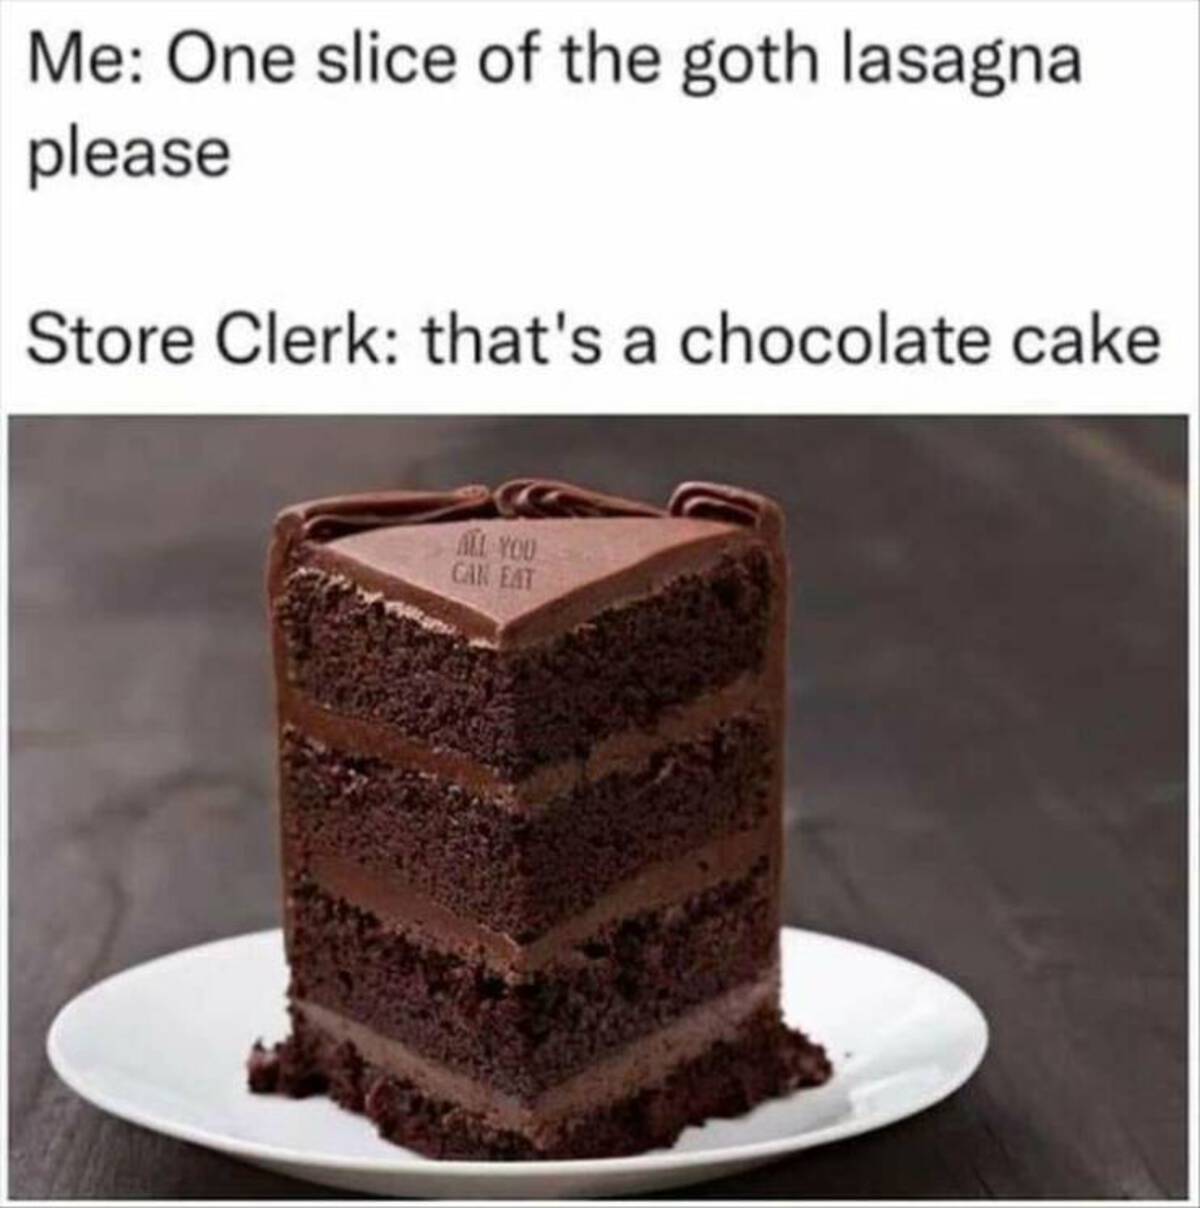 chocolate cake istock - Me One slice of the goth lasagna please Store Clerk that's a chocolate cake All You Can Eat